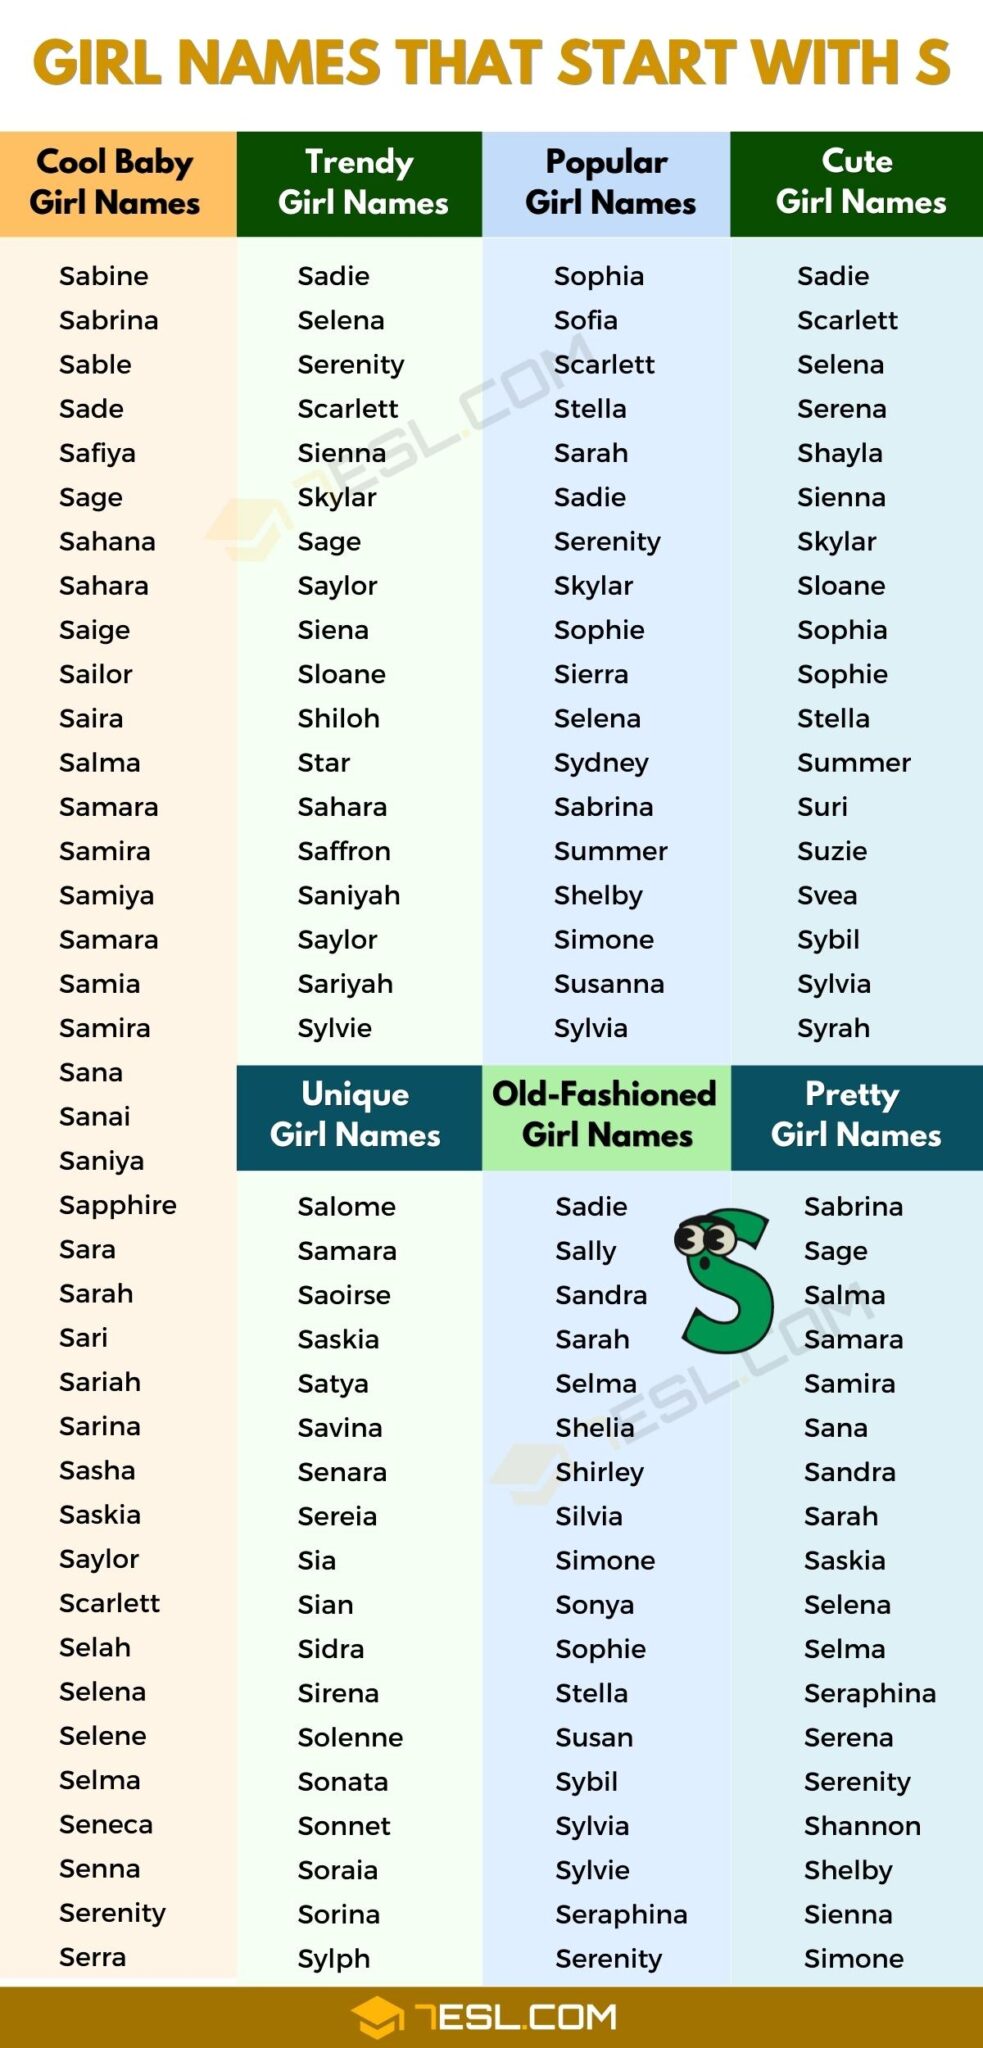 Girl Names That Start With S And End With A